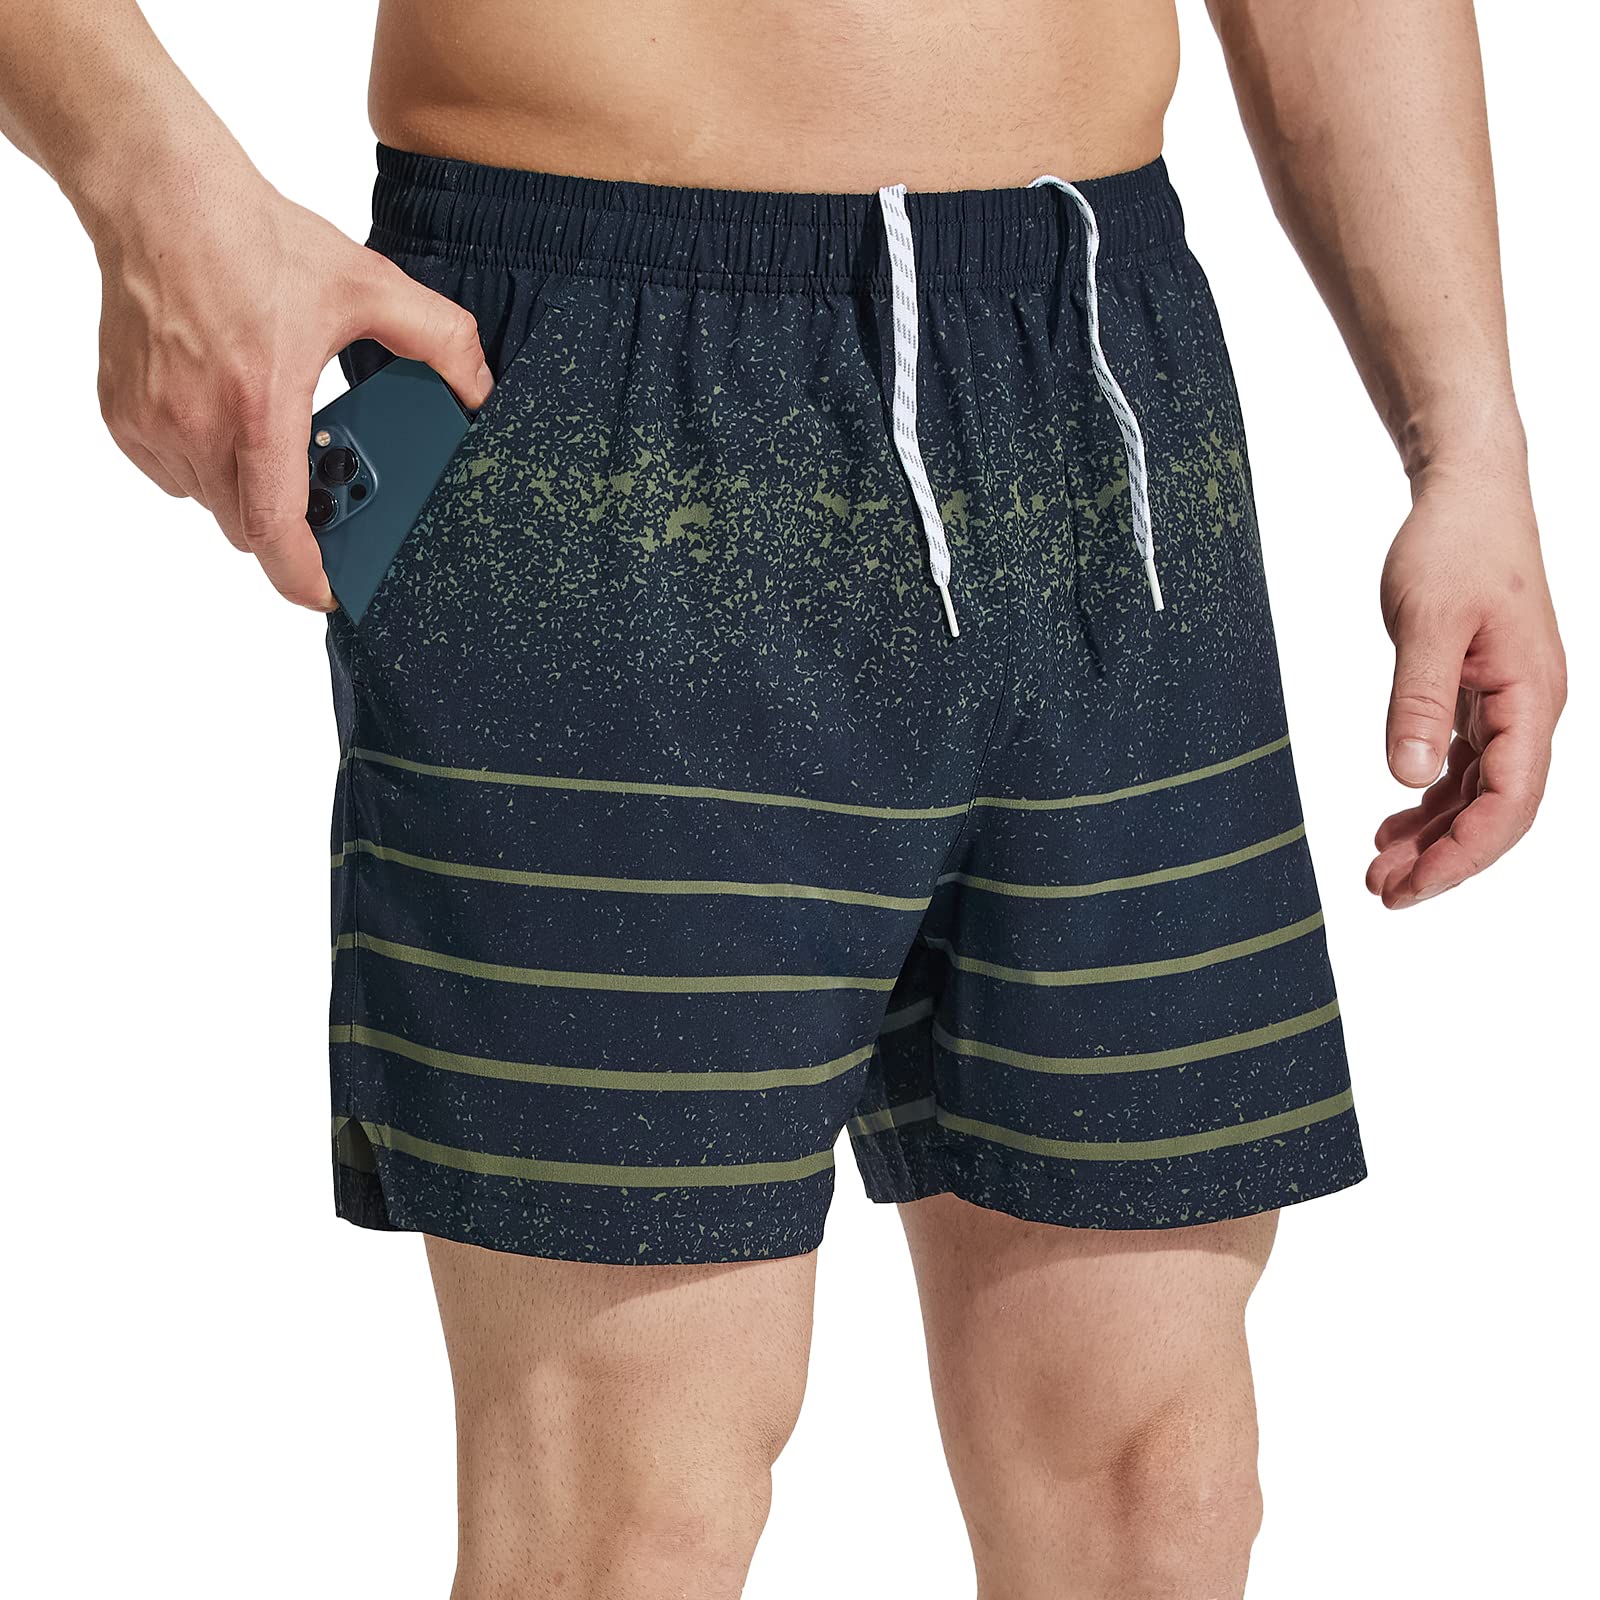 Men Workout Running Shorts Lightweight 5 Inches Shorts with Pockets Men's Shorts Print Navy / S MIER